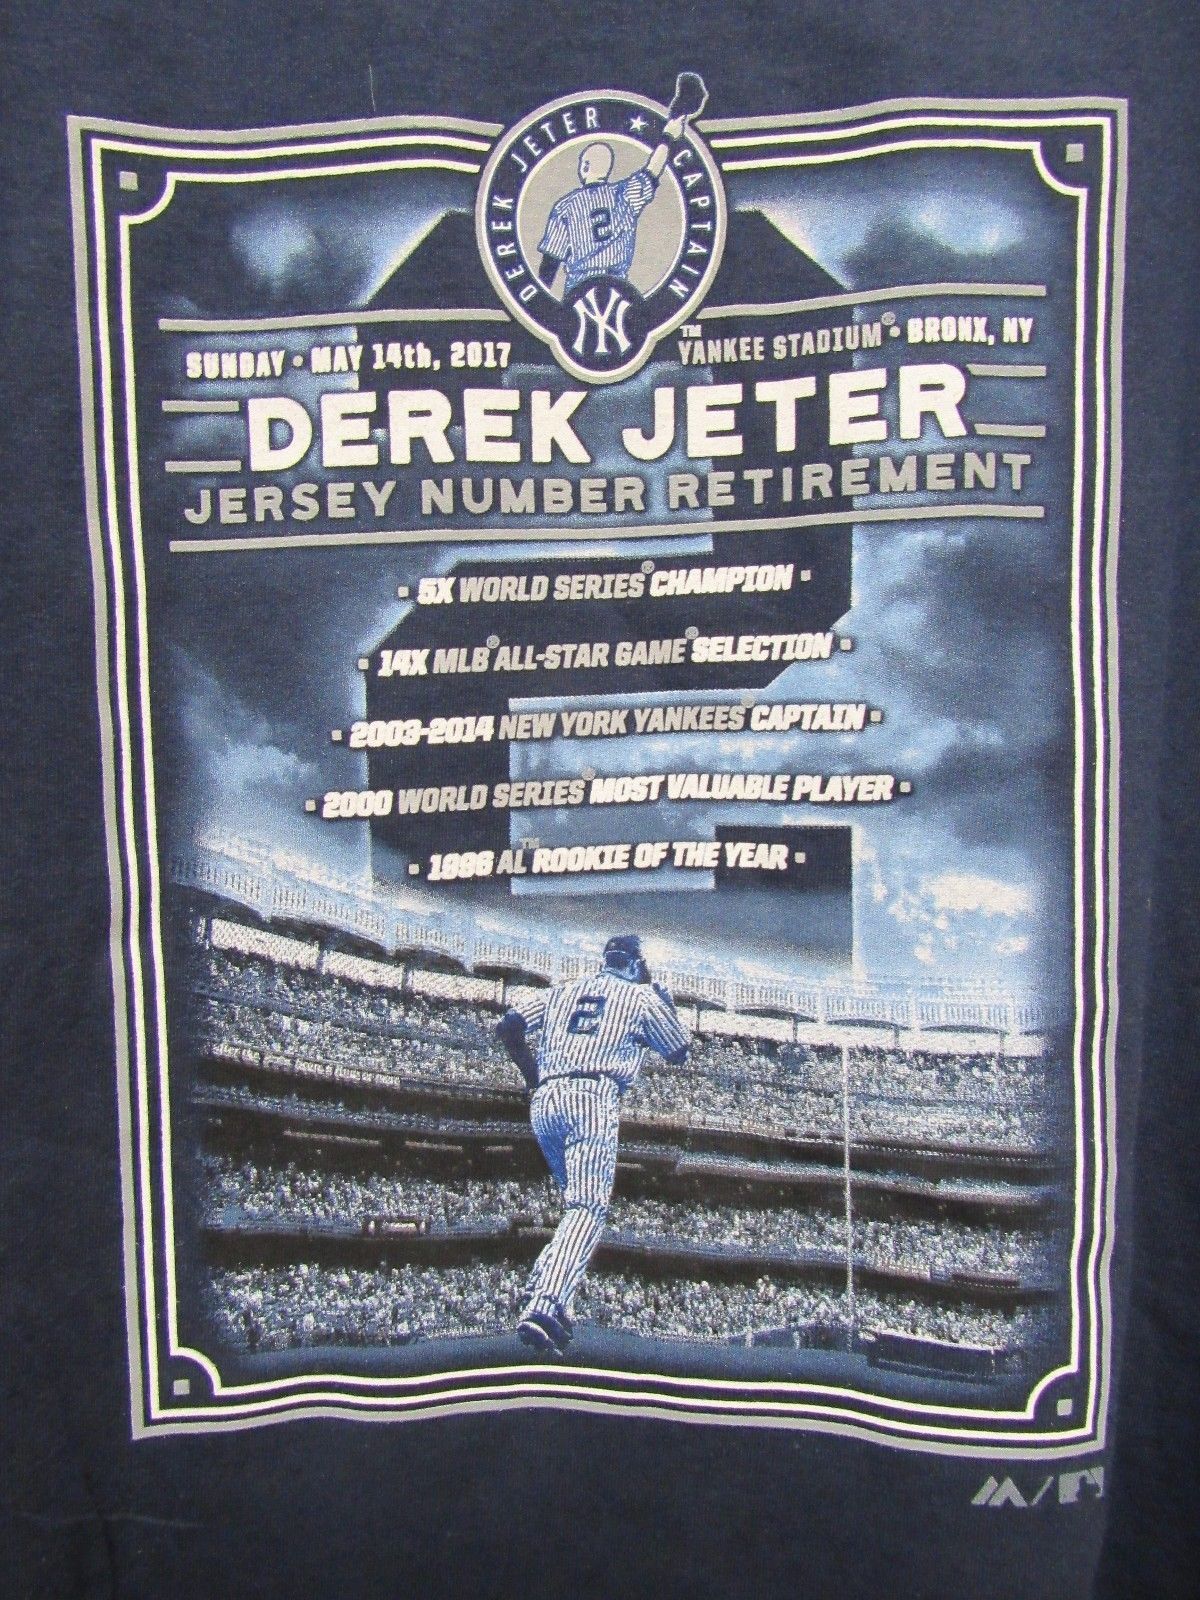 NEW WITH TAGS MAJESTIC NEW YORK YANKEES DEREK JETER JERSEY STITCHED 2 XL  ADULT